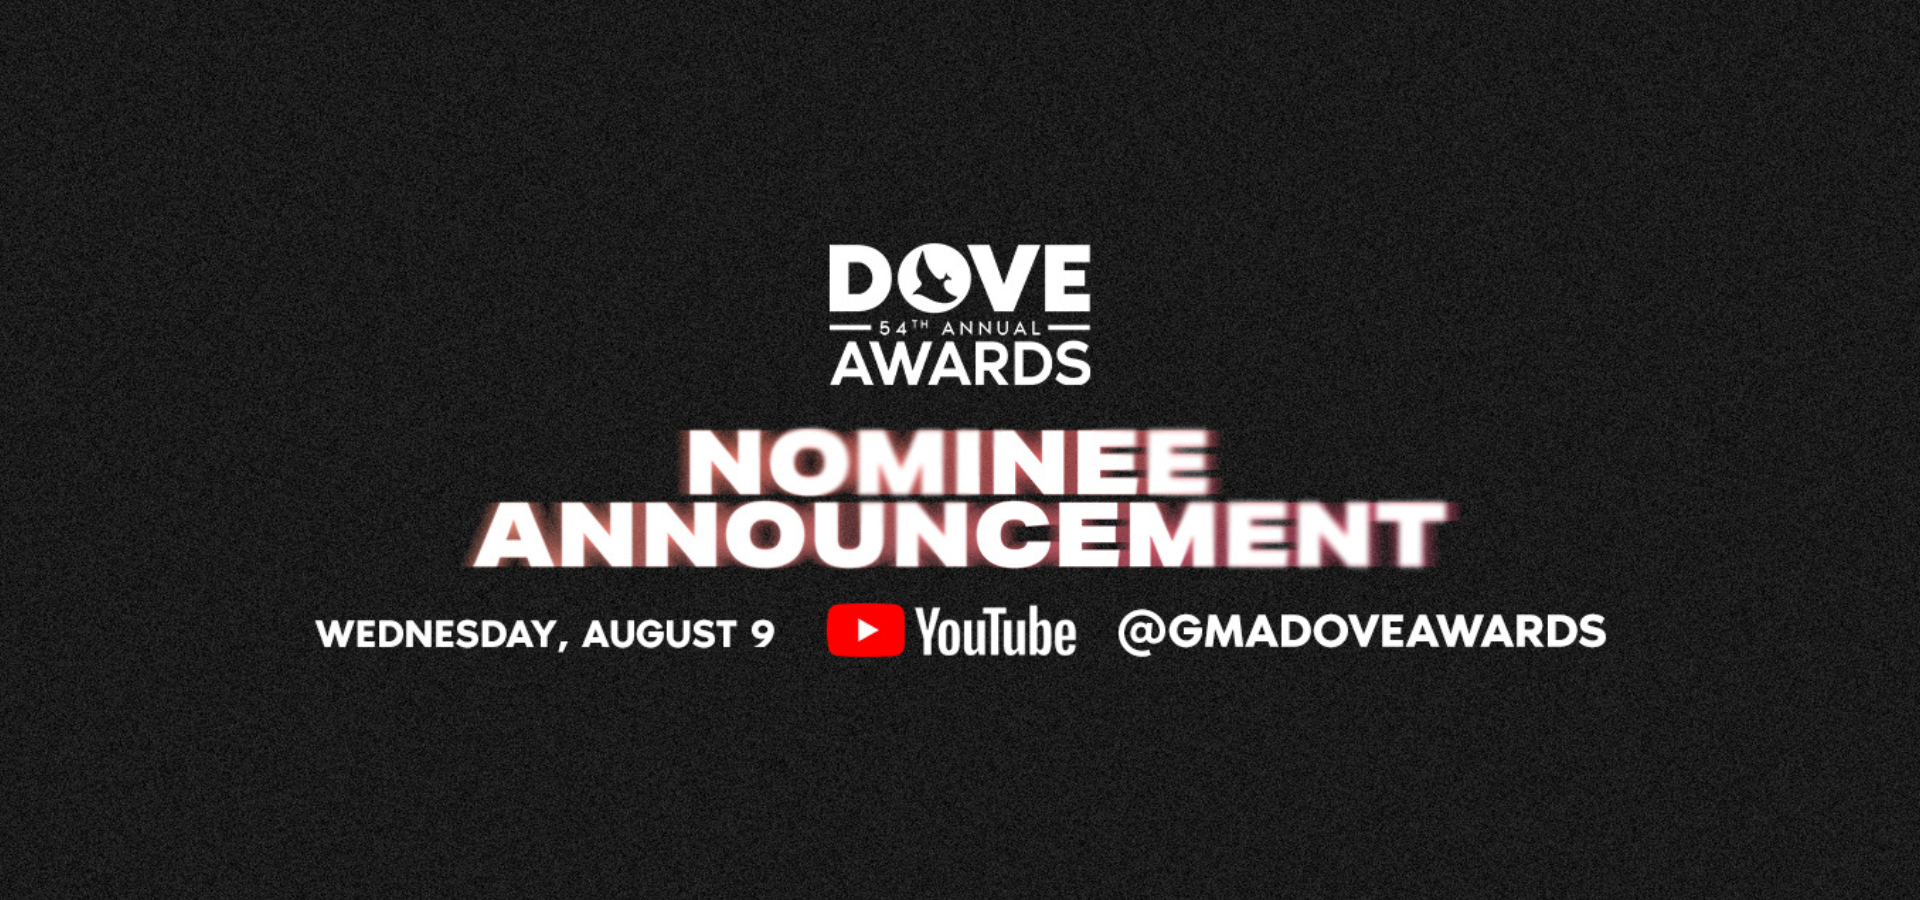 WATCH: Nominee Announcement for the 54th Annual GMA Dove Awards